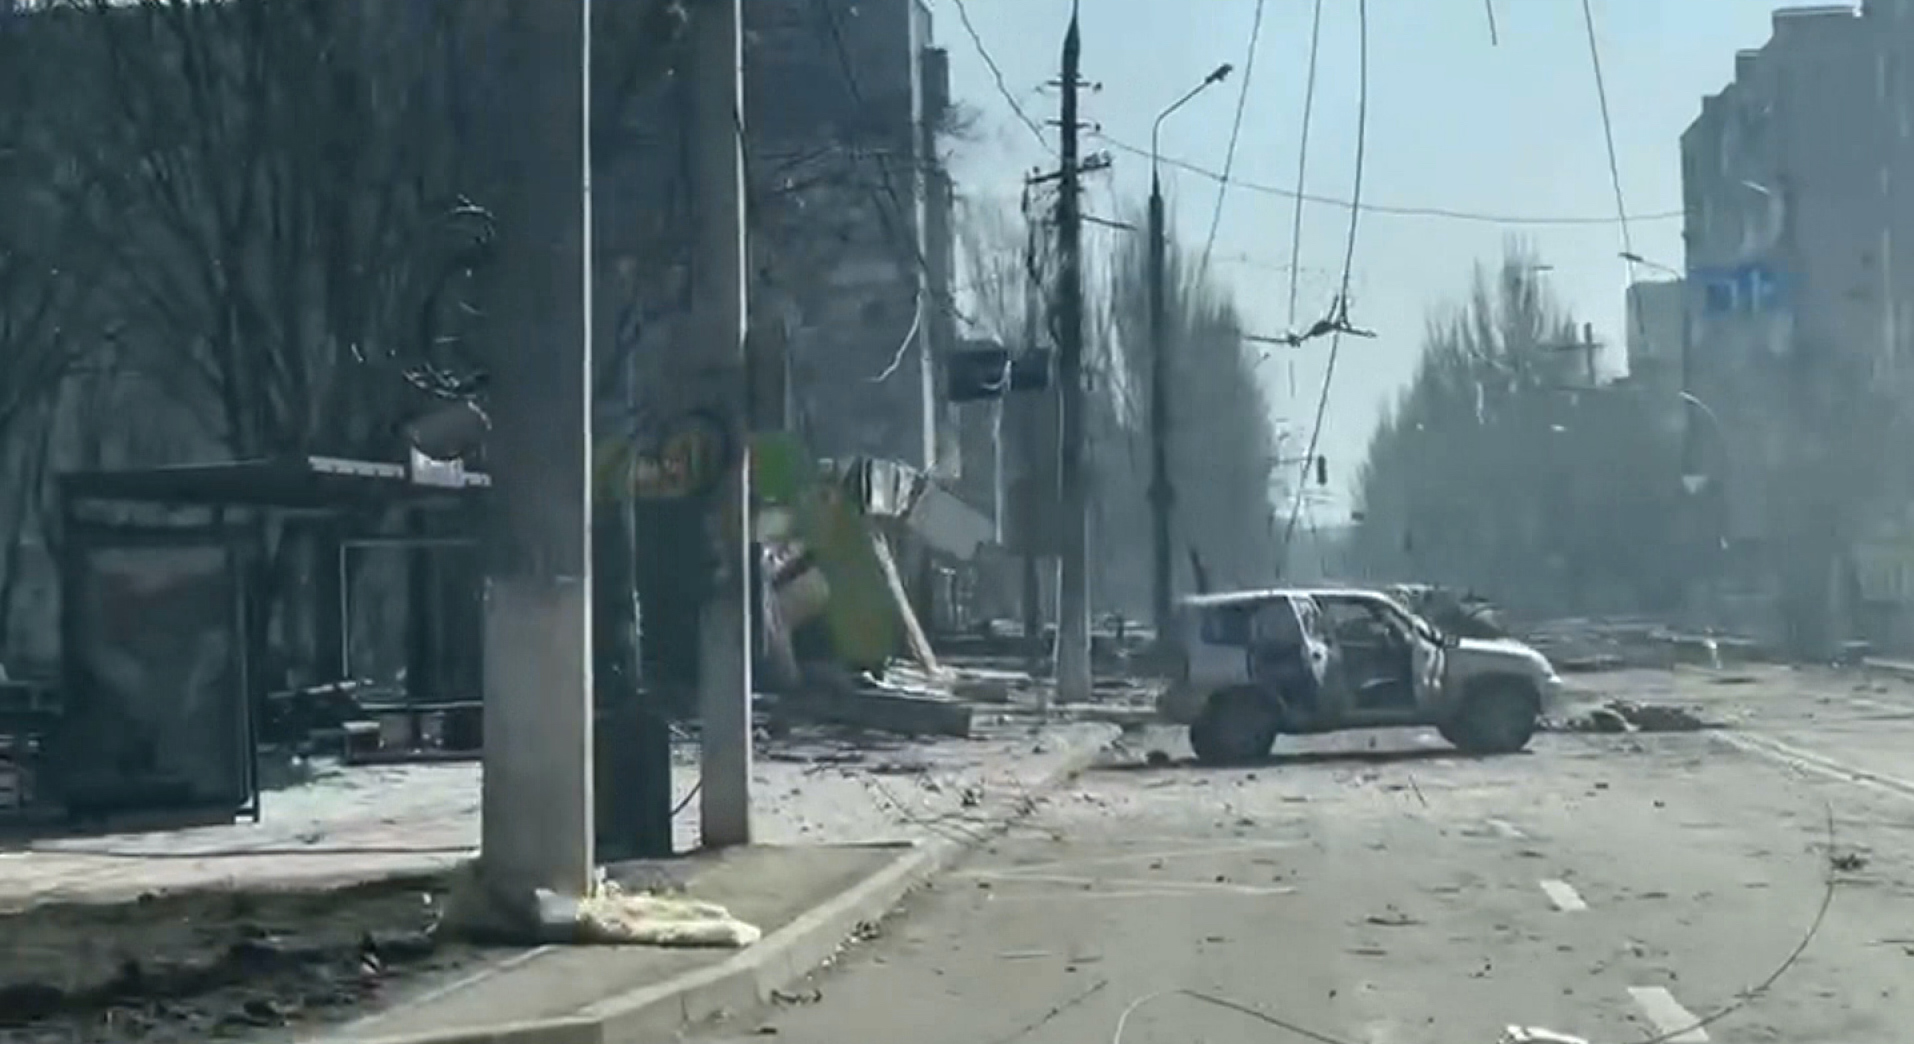 View of Mariupol from video obtained by CNN.